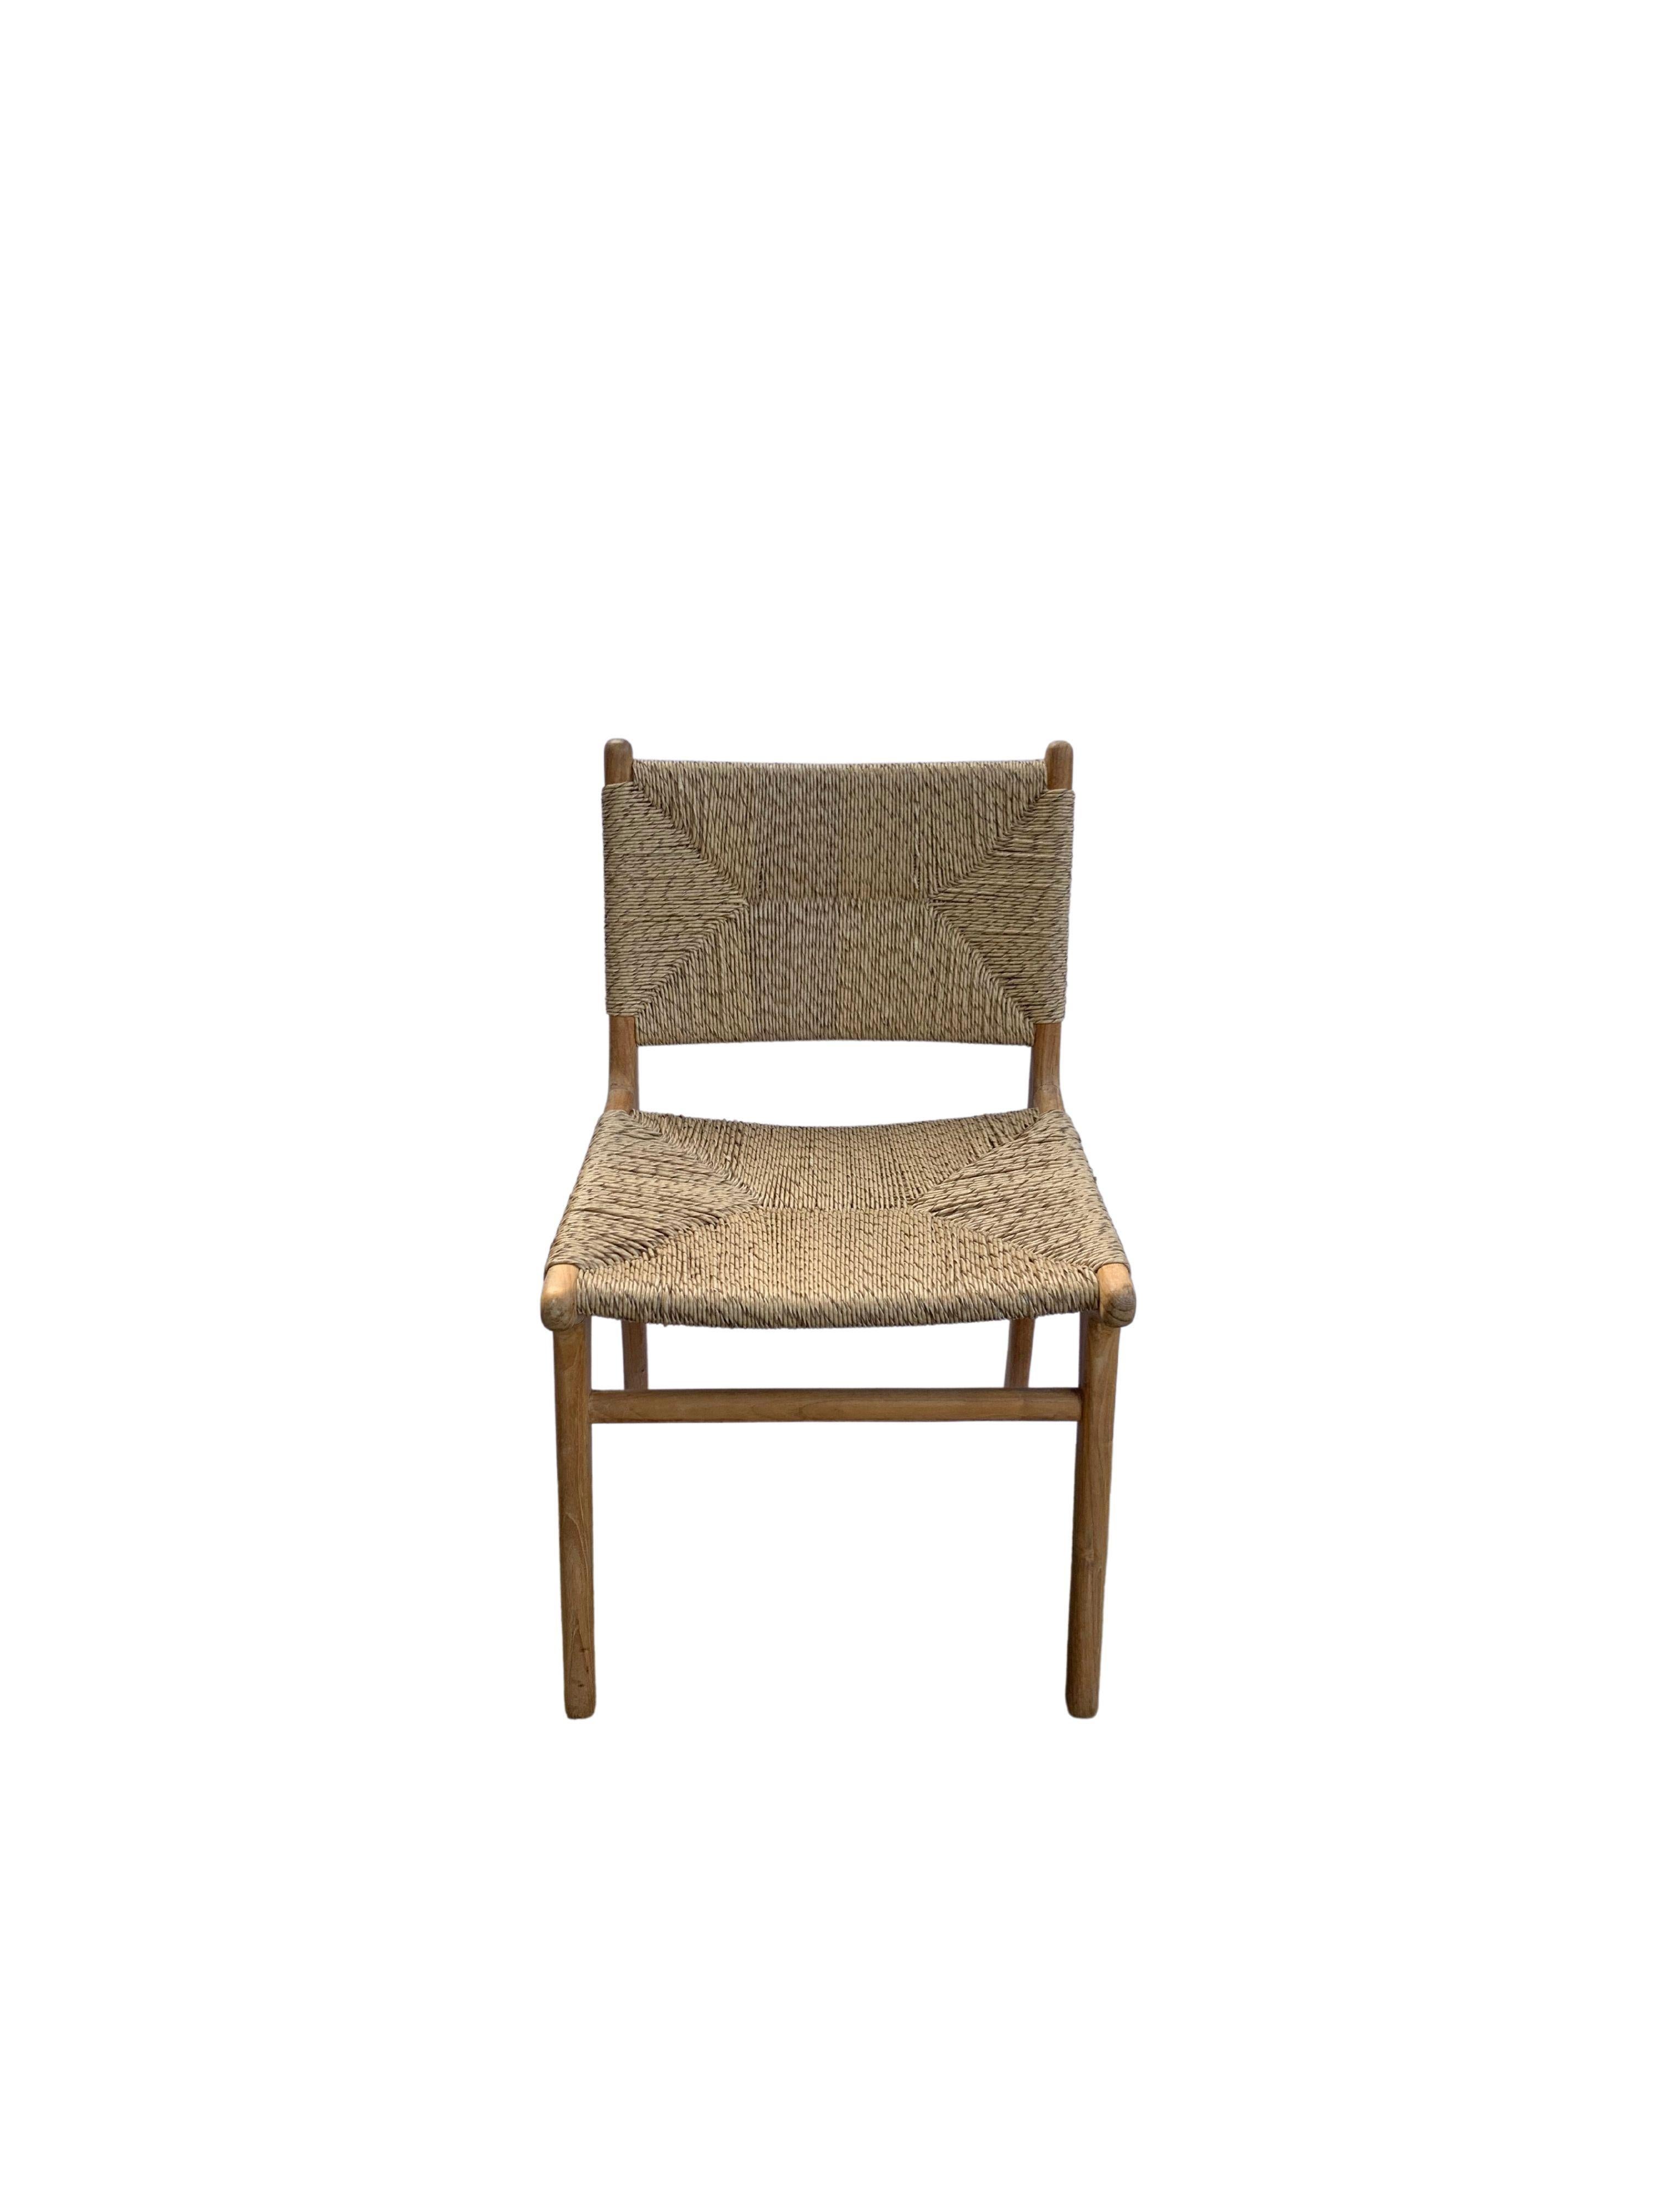 A hand-crafted teak framed & woven synthetic rattan chair. These chairs are crafted by local artisans using a wood joinery technique without the use of nails. They feature a subtle wood texture and are robust and sturdy. Synthetic rattan is more low